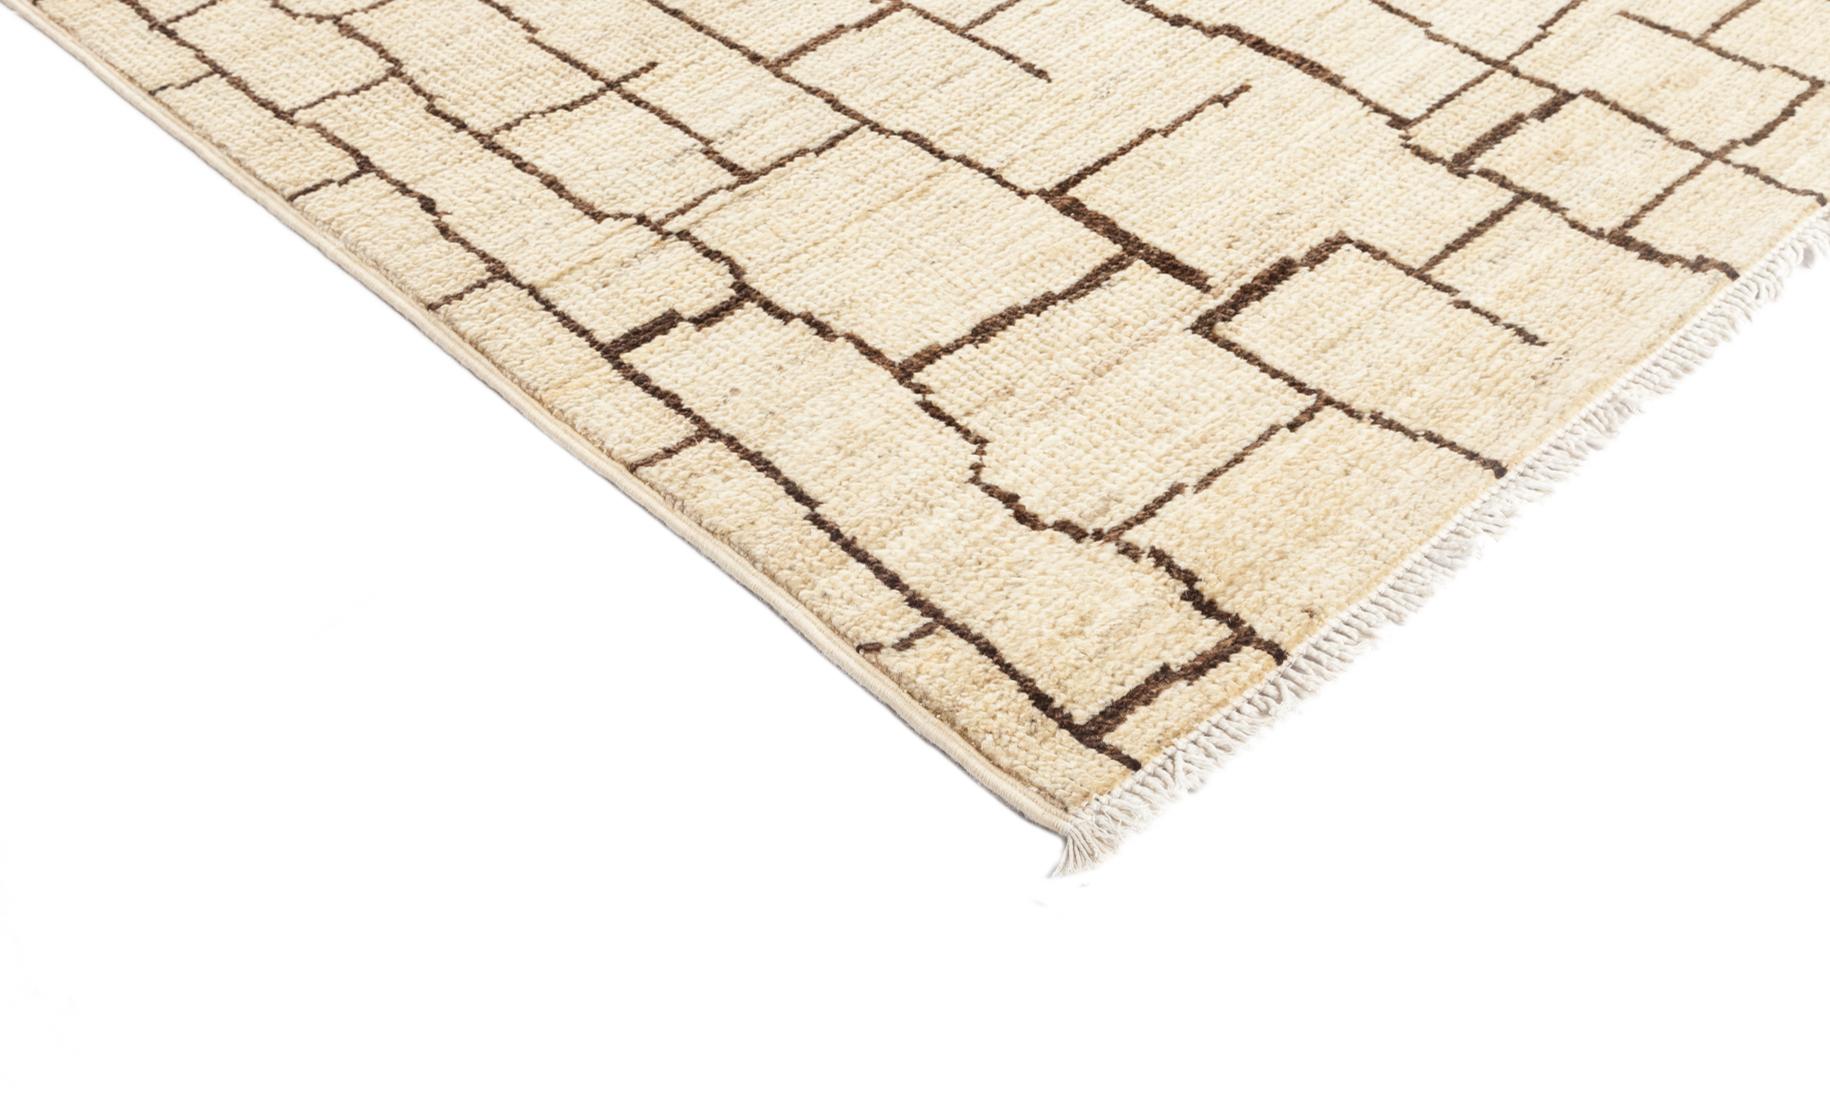 Inspired by the weavings of the Beni Ourain nomadic tribe in Morocco's snowy Atlas Mountains, this modern version offers lushness and warmth in addition to style. Its plush, shaggy pile is reminiscent of the original carpets, which were used as